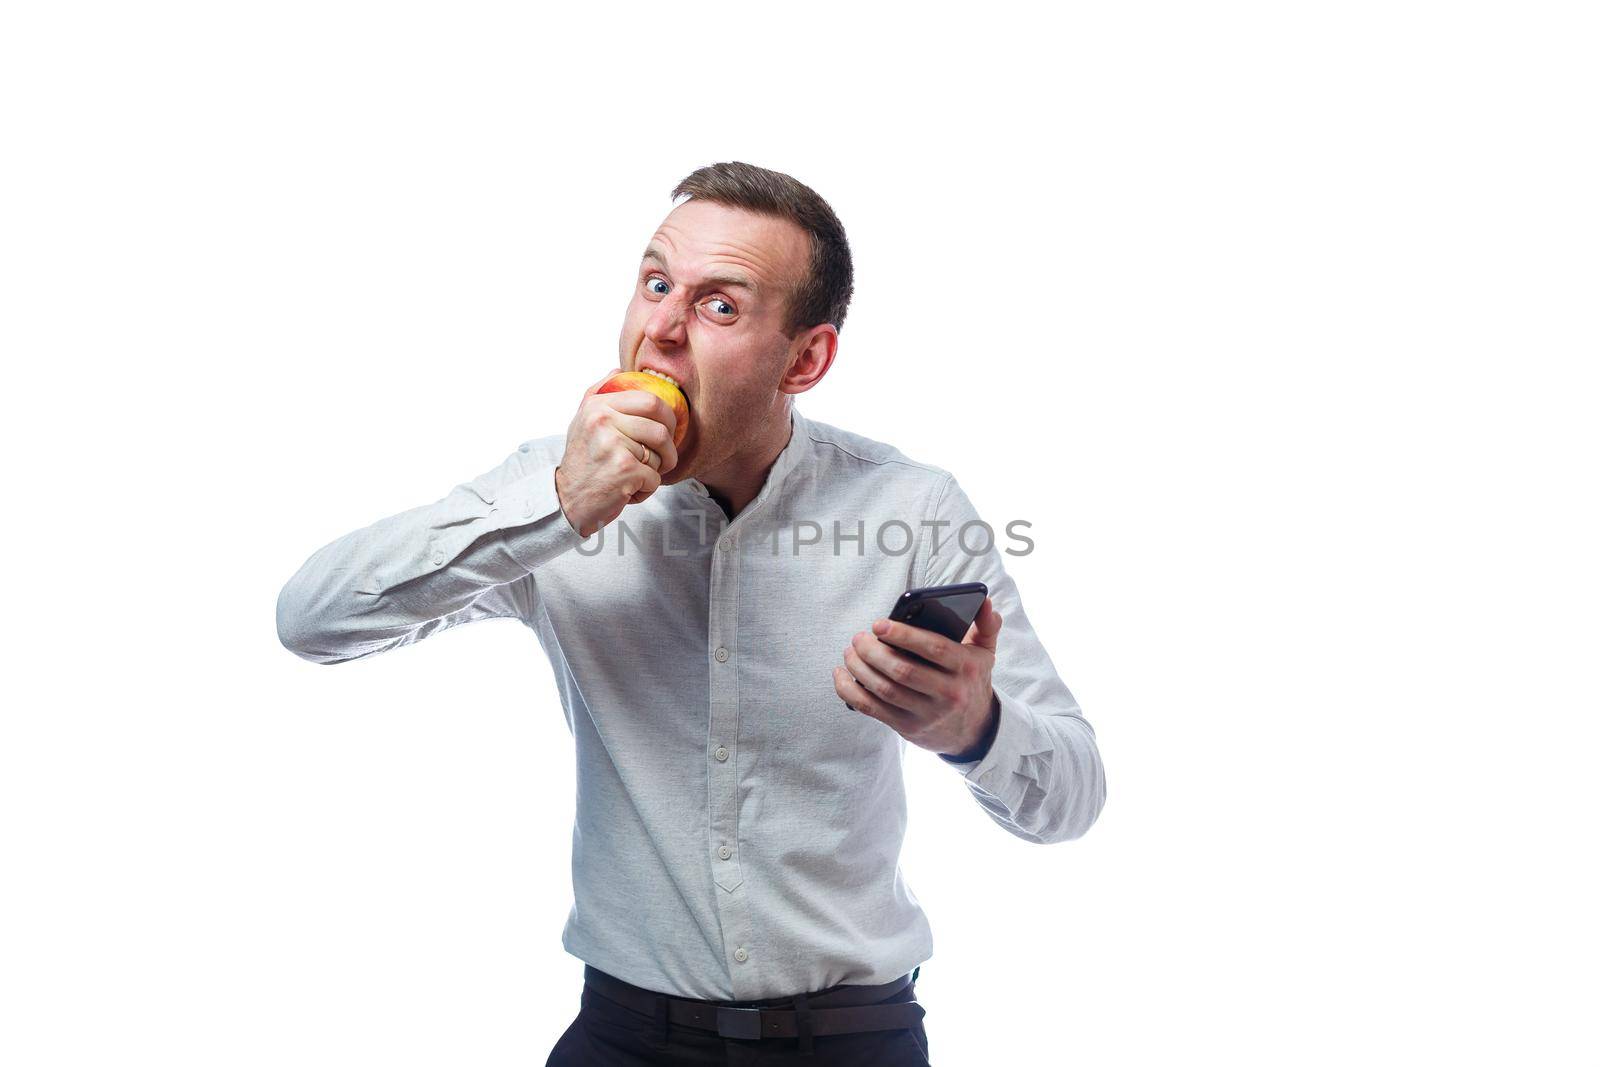 Caucasian male businessman holding a mobile phone in black and holding a red-yellow apple. He is wearing a shirt. Emotional portrait. Isolated on white background by Dmitrytph